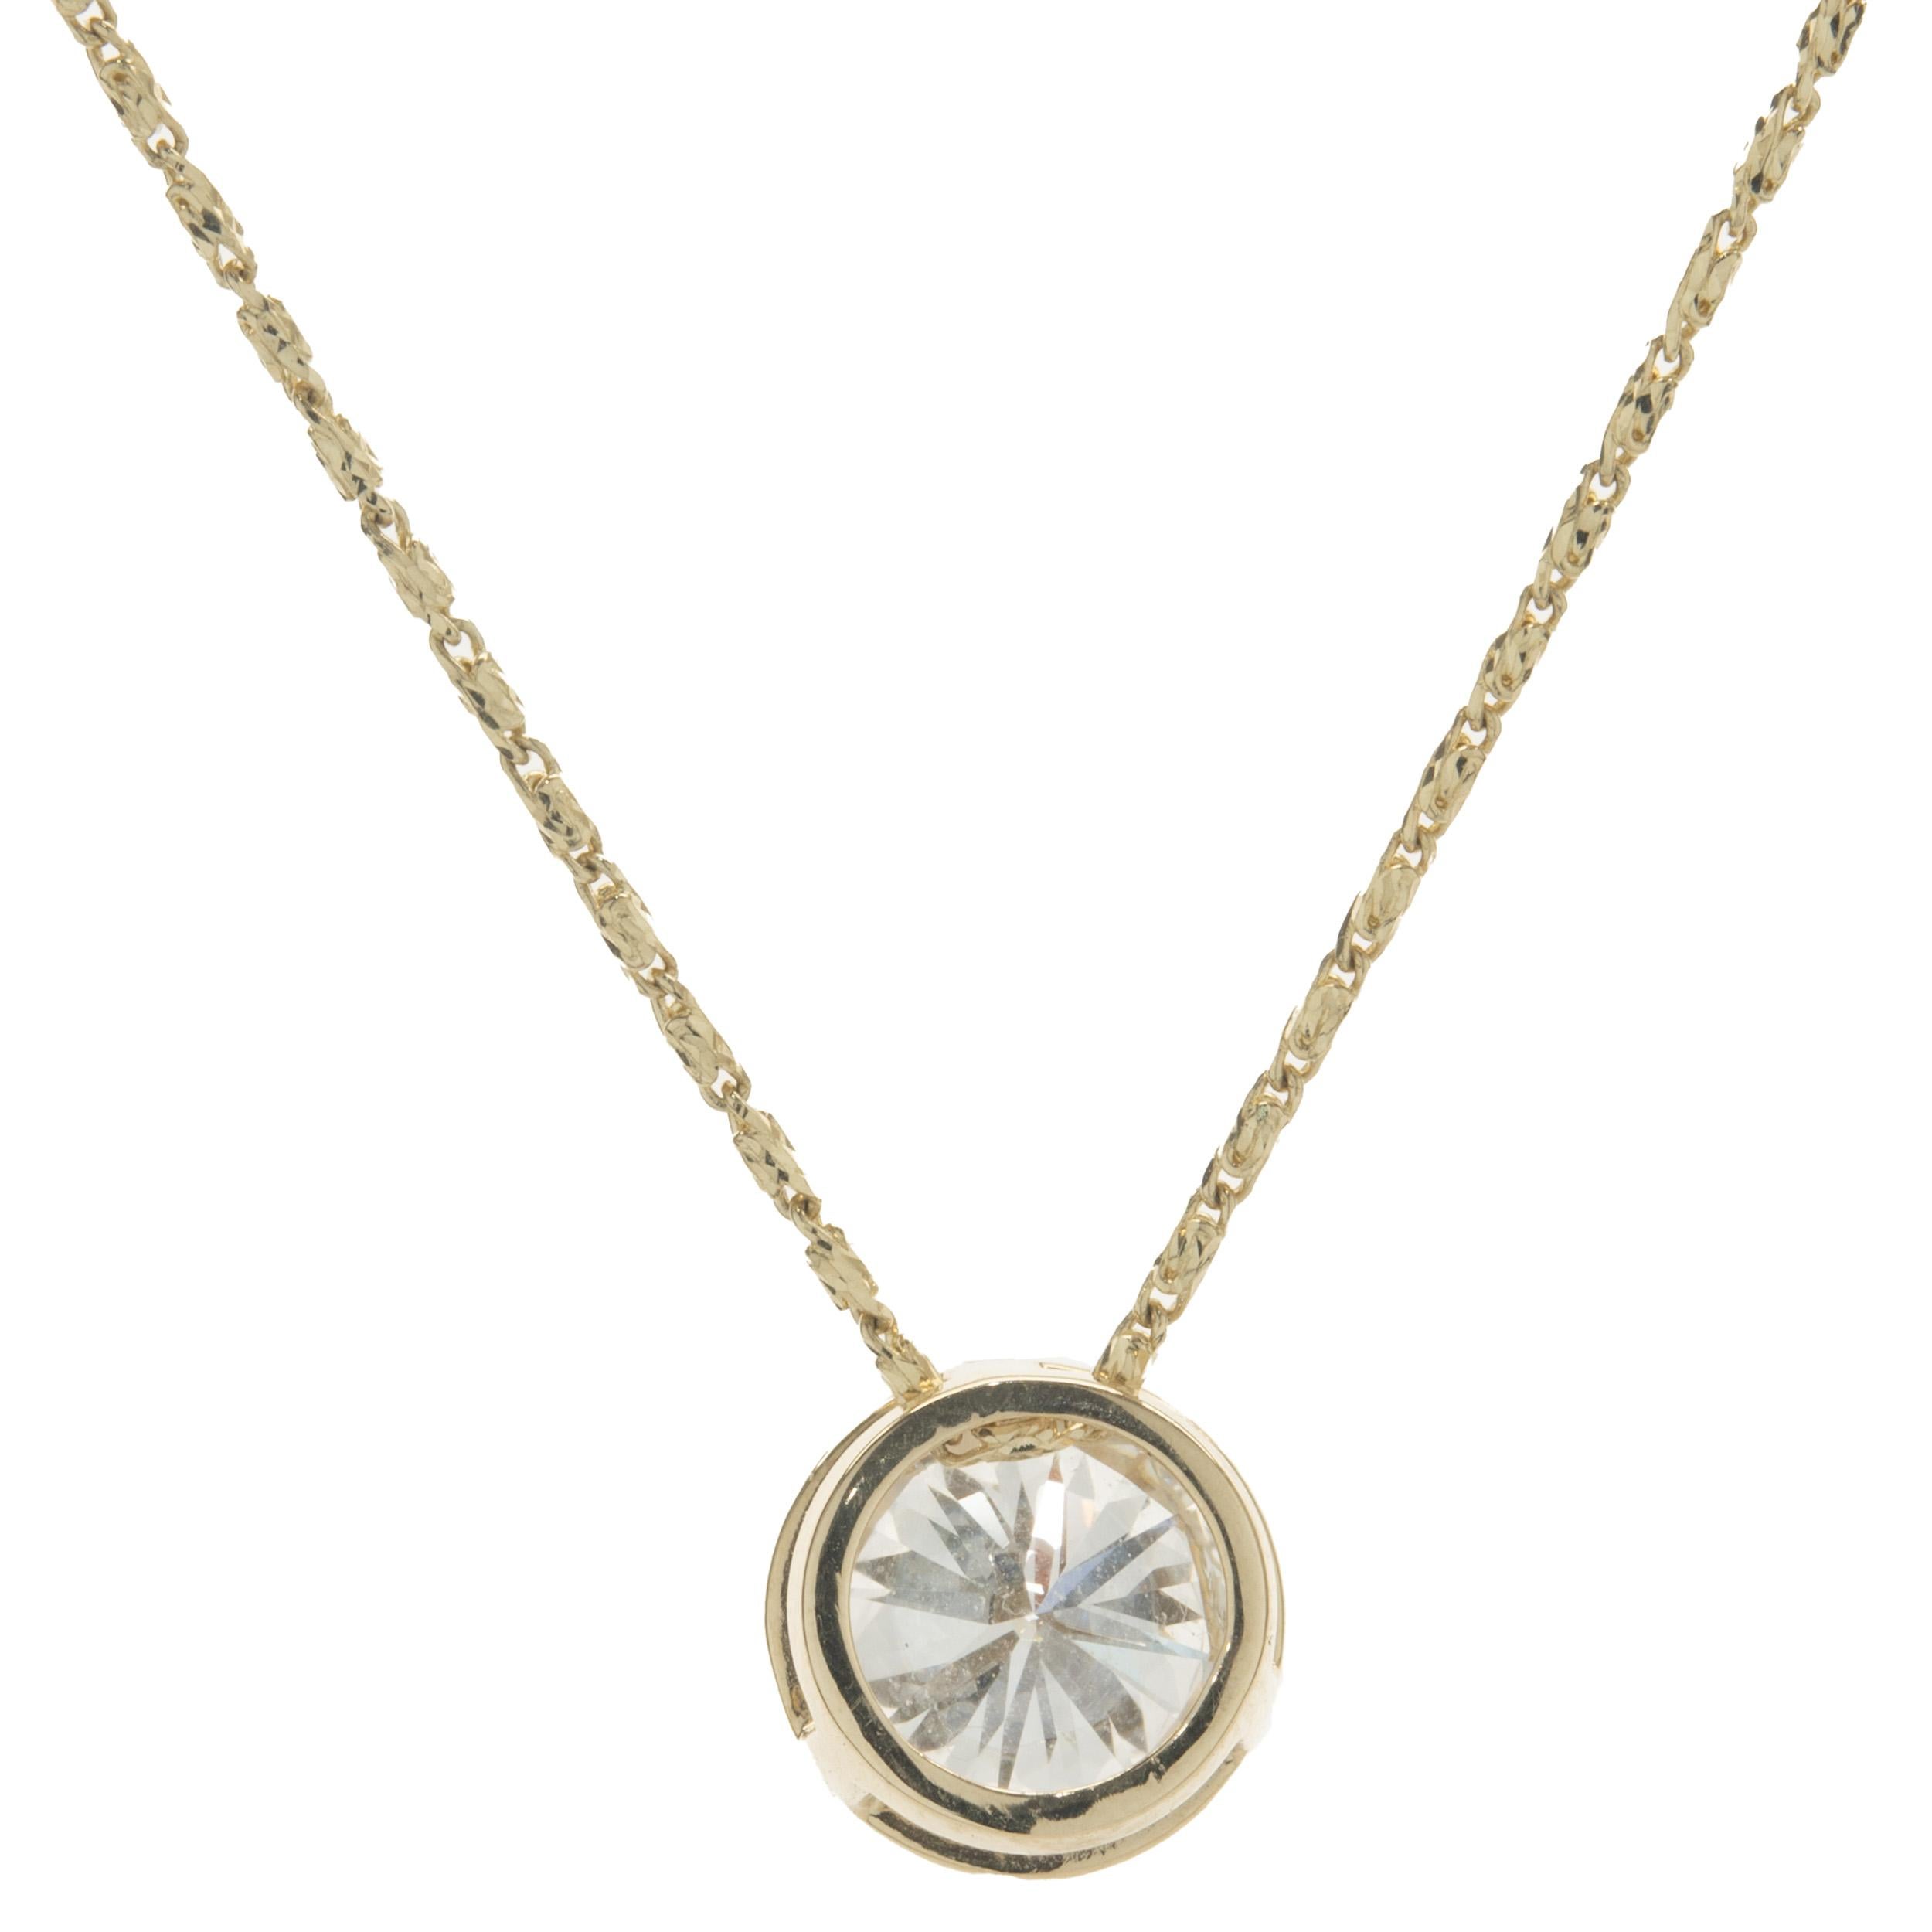 Material: 14K yellow gold
Diamond: round brilliant cut = 1.97cttw
Color: H
Clarity: SI3
Dimensions: necklace measures 18-inches in length 
Weight: 3.60 grams